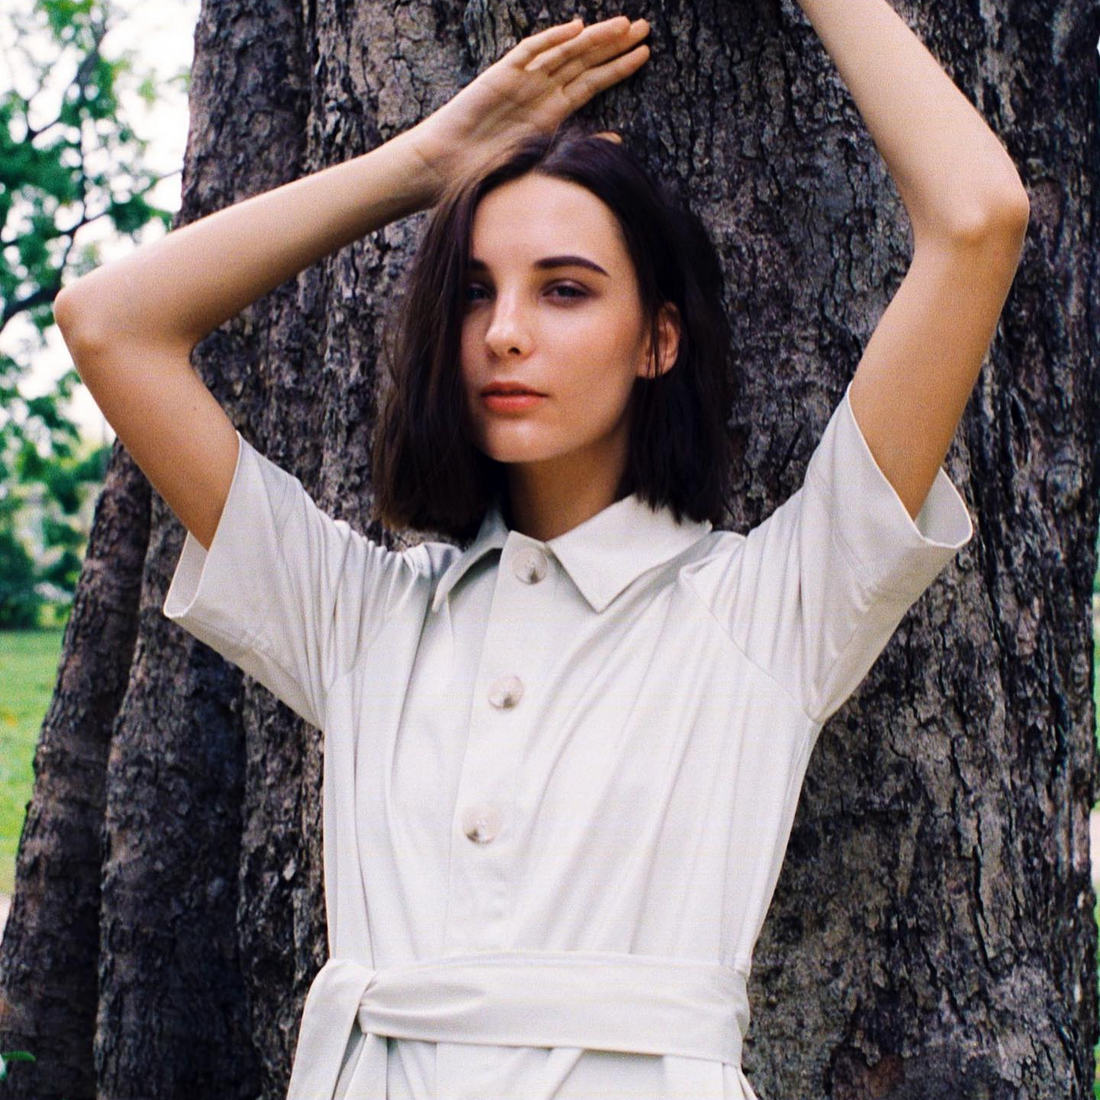 A woman with short brown hair leans against a tree. She has her arms raised above her head. She is wearing a white shirt dress.